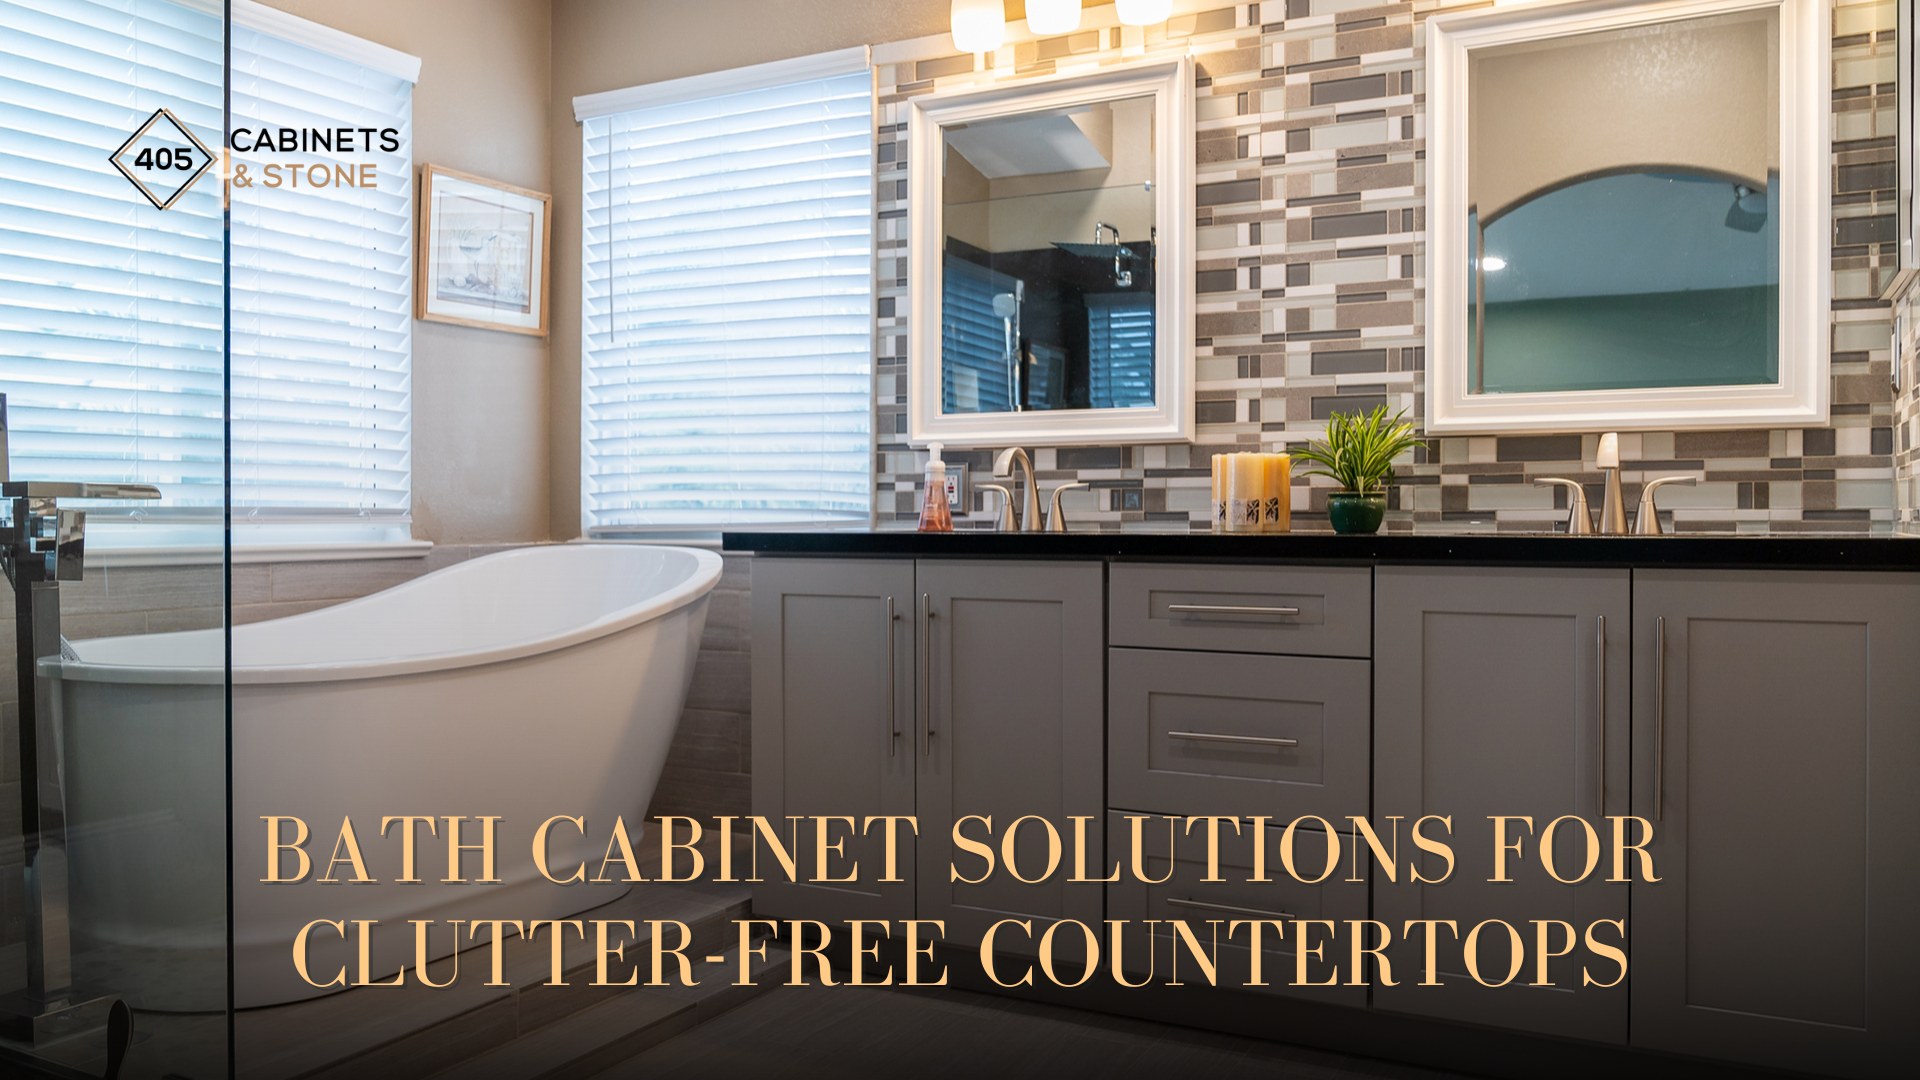 Bath Cabinet Solutions for Clutter-Free Countertops